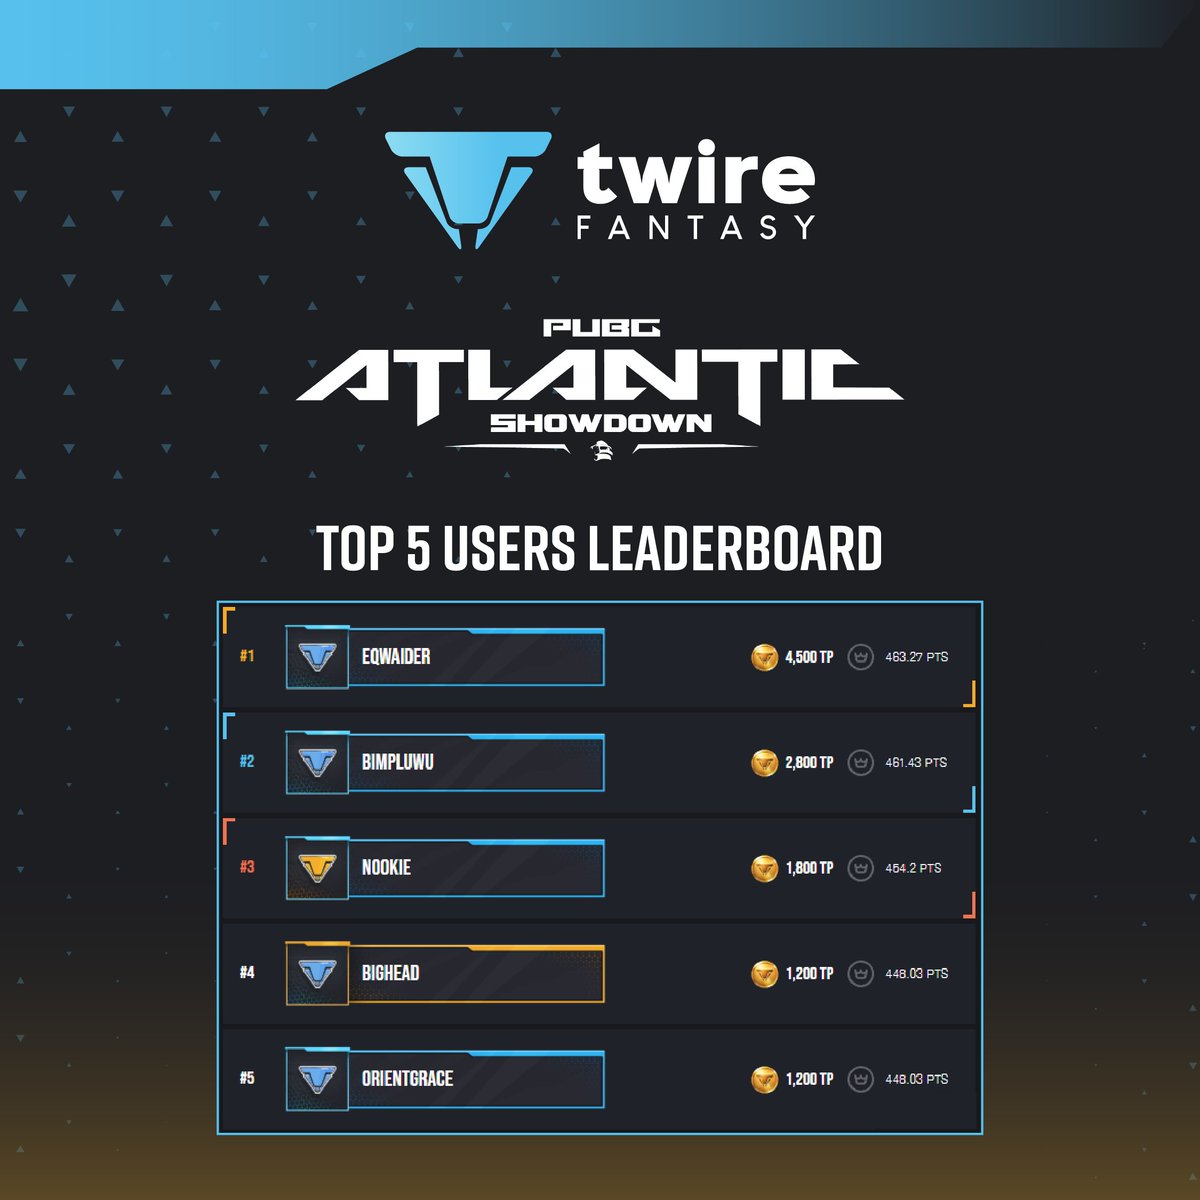 Some known names on the Top 5 Users Leaderboard of PUBG Atlantic Showdown Twire Fantasy 👀 Congratulations to EQWAIDER for getting 1st. 🥇 #TwireFantasy